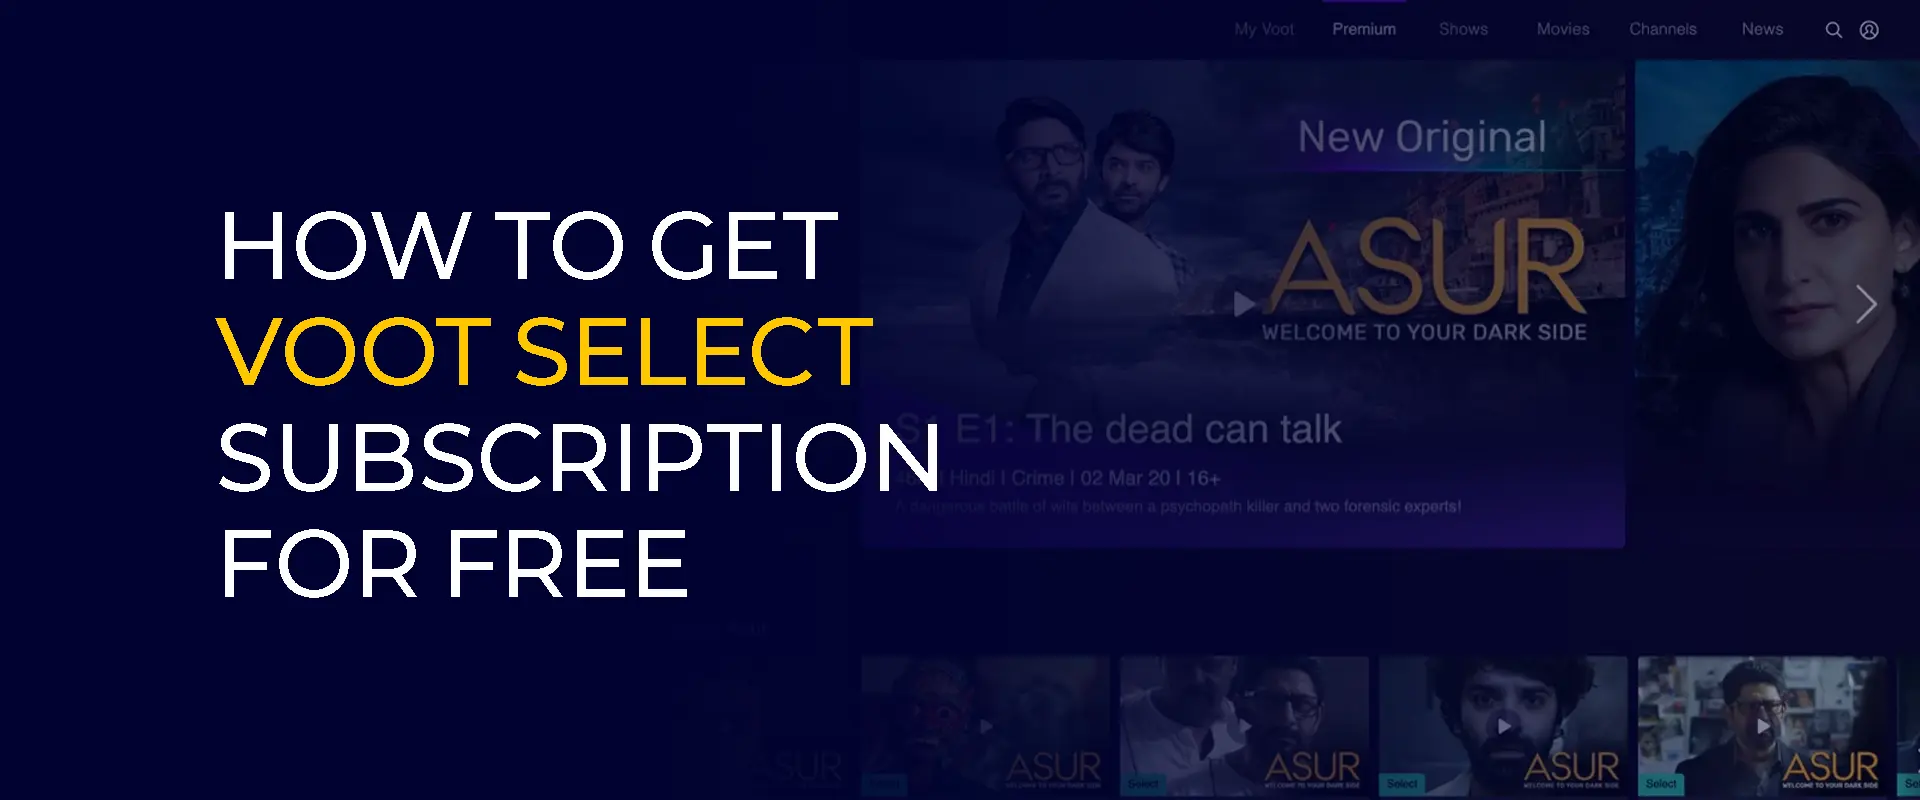 How to Get Voot Select Subscription For Free